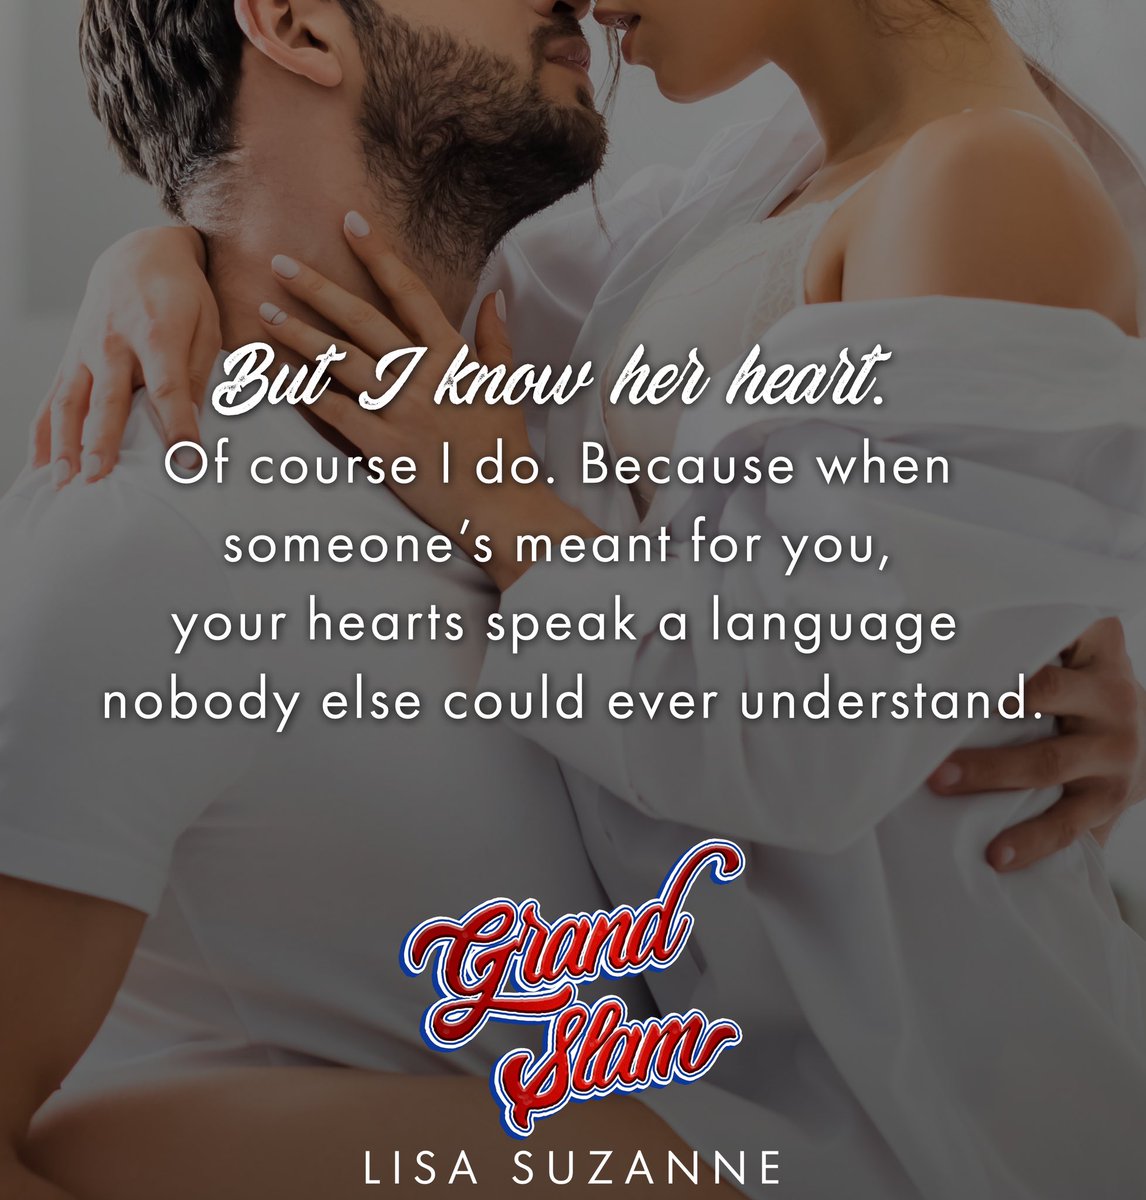 ⚾️❤️🎤  #TeaserTuesday ⚾️❤️🎤

GRAND SLAM the fifth and final book in the #VegasHeatBasesLoadedSeries by @LisaSuzanne24 releases on April 18th.

Go to bit.ly/443MYHn for details

@WordsmithPublic  

#LisaSuzanne #FriendsToLovers #BadBoyGoodGirl #BaseballRomance